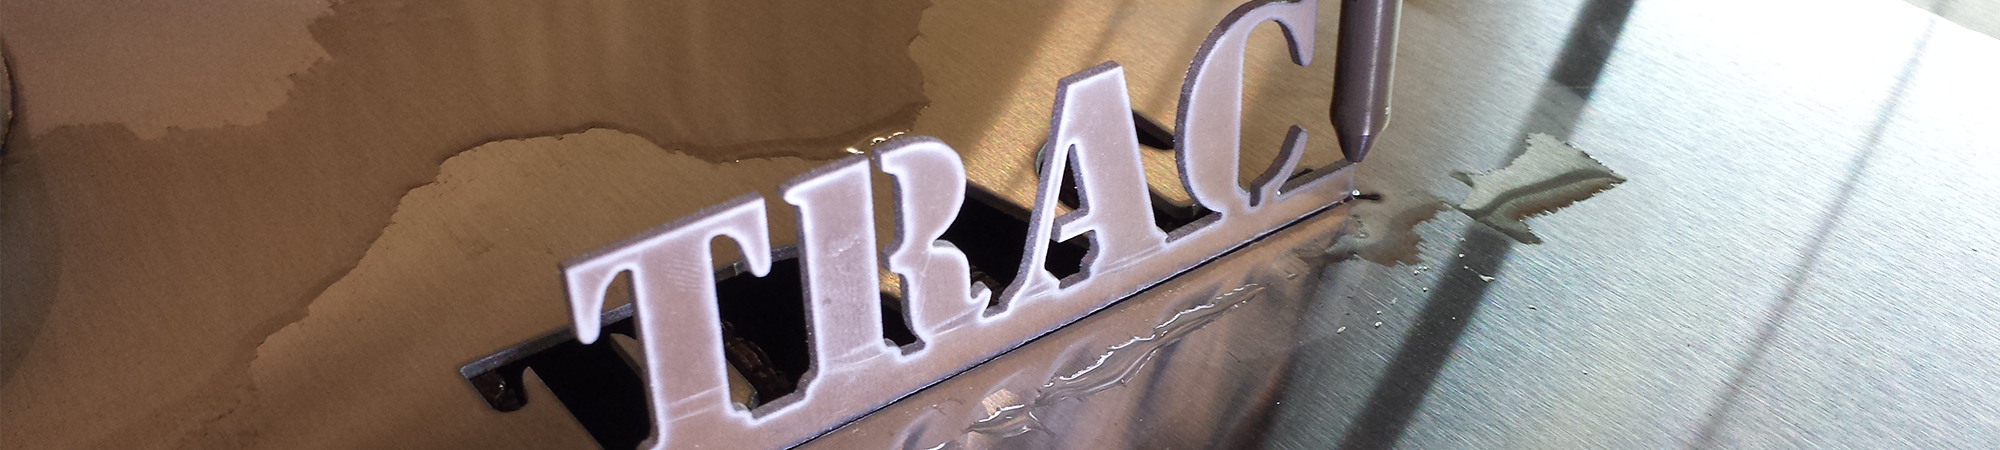 Trac Precision name freshly cut from metal on the water jet.